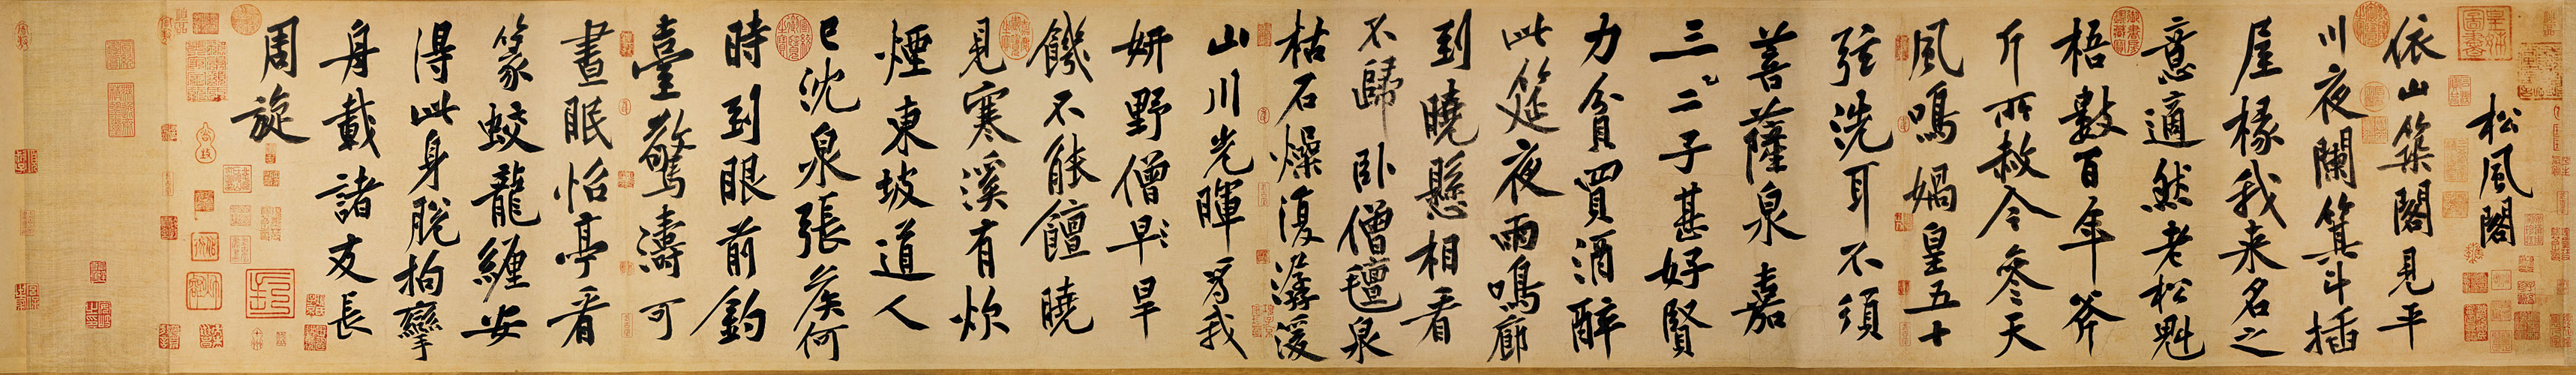 Huang Tingjian: Poem on the Hall of Pines and Wind